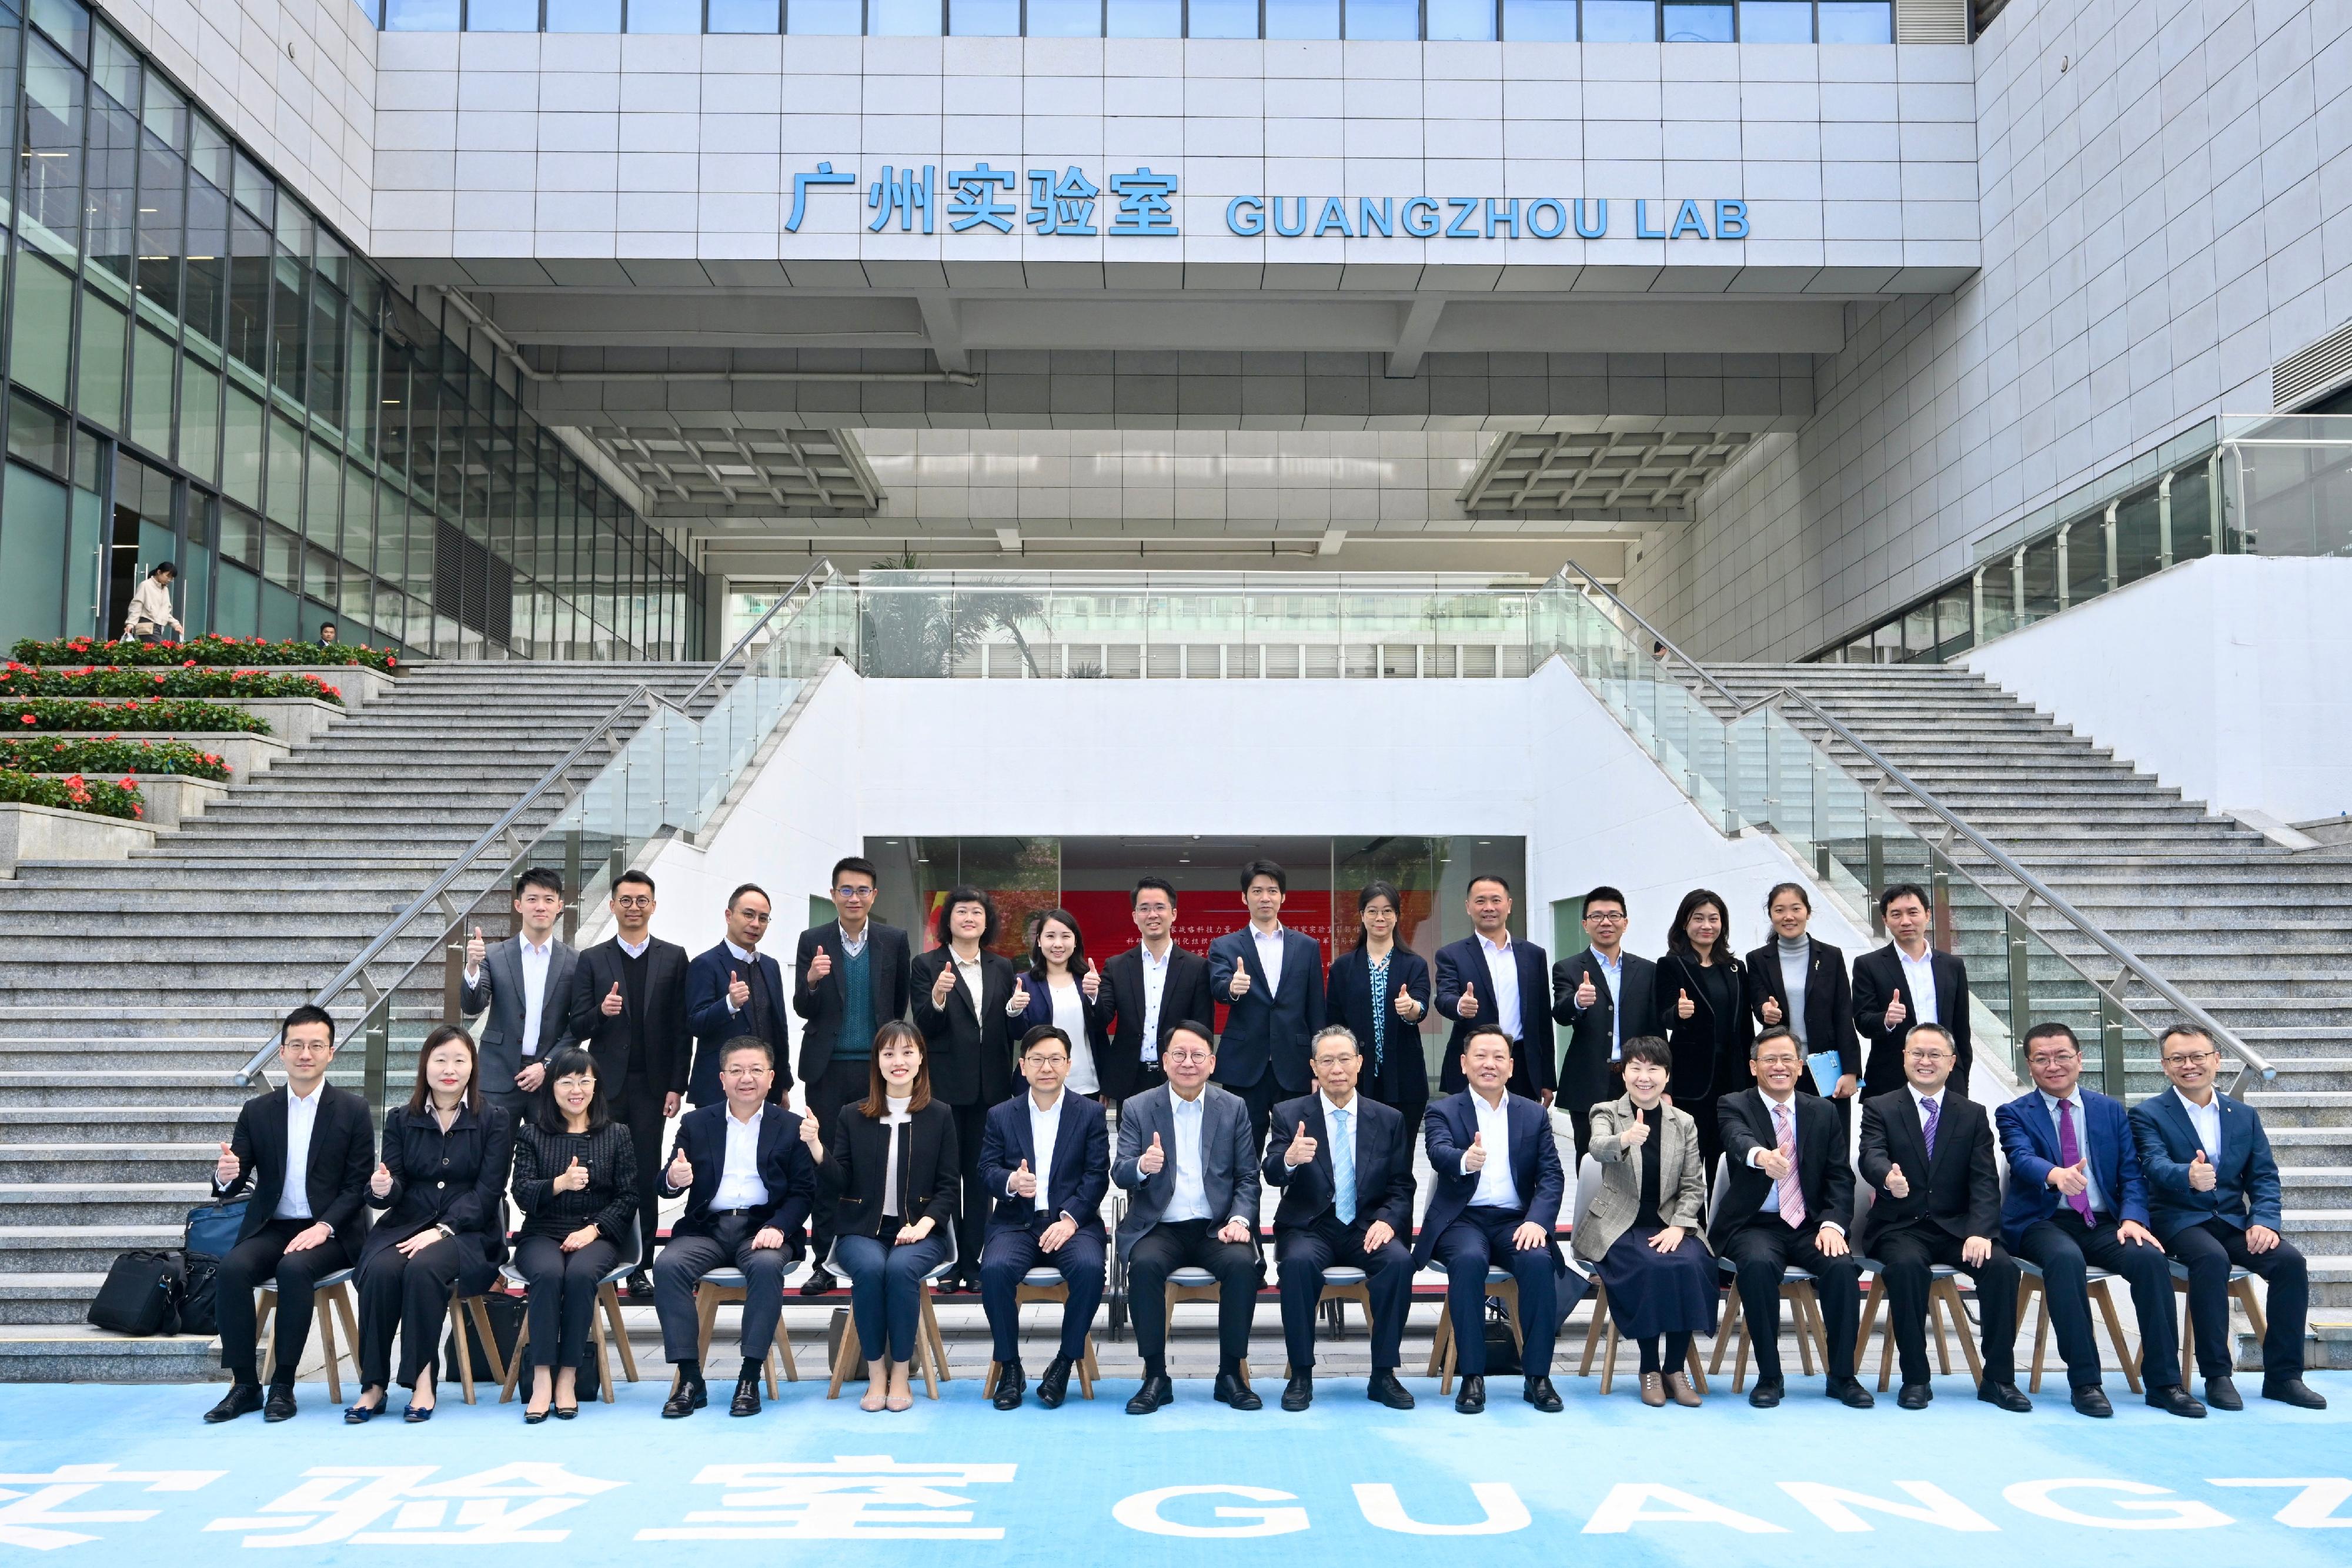 The Chief Secretary for Administration, Mr Chan Kwok-ki, arrived in Guangzhou today (January 8) to begin his visit to Mainland cities of the Guangdong-Hong Kong-Macao Greater Bay Area. Photo shows (front row, from fifth left) the Under Secretary for Innovation, Technology and Industry, Ms Lillian Cheong; the Secretary for Labour and Welfare, Mr Chris Sun; Mr Chan; academician of the Chinese Academy of Engineering Professor Zhong Nanshan; and the Deputy Director General of the Hong Kong and Macao Affairs Office of the People's Government of Guangdong Province Mr Huang Duanlian, at the Guangzhou National Laboratory.